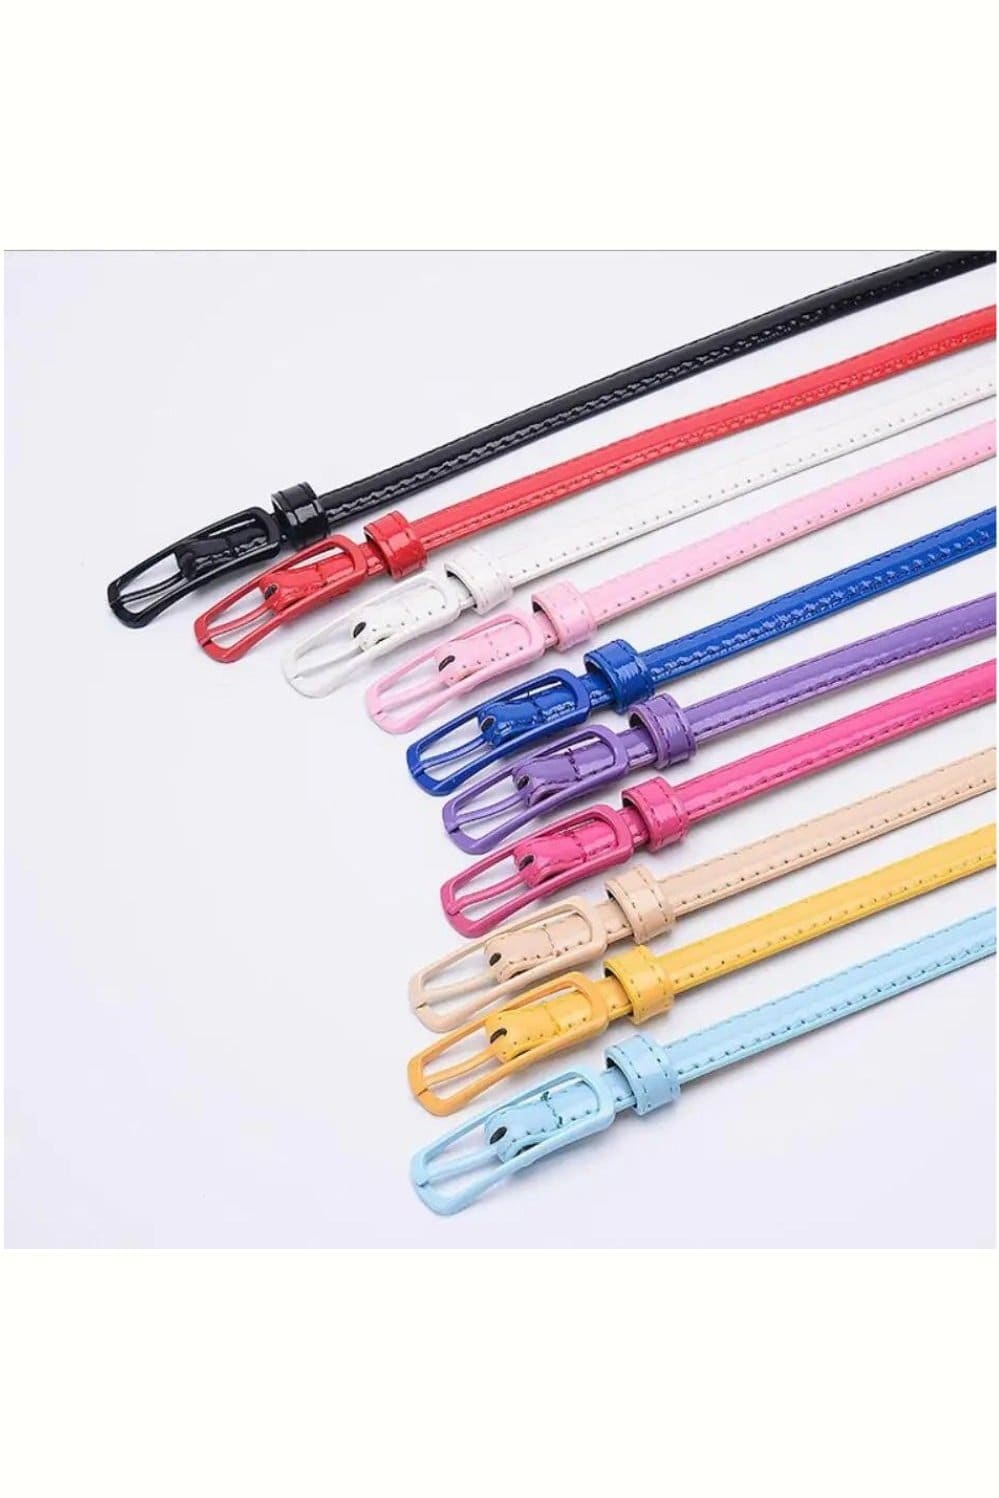 Elegant and Classy Colorful Leather Belt for Women - 105cm x 1.2cm Fatio General Trading